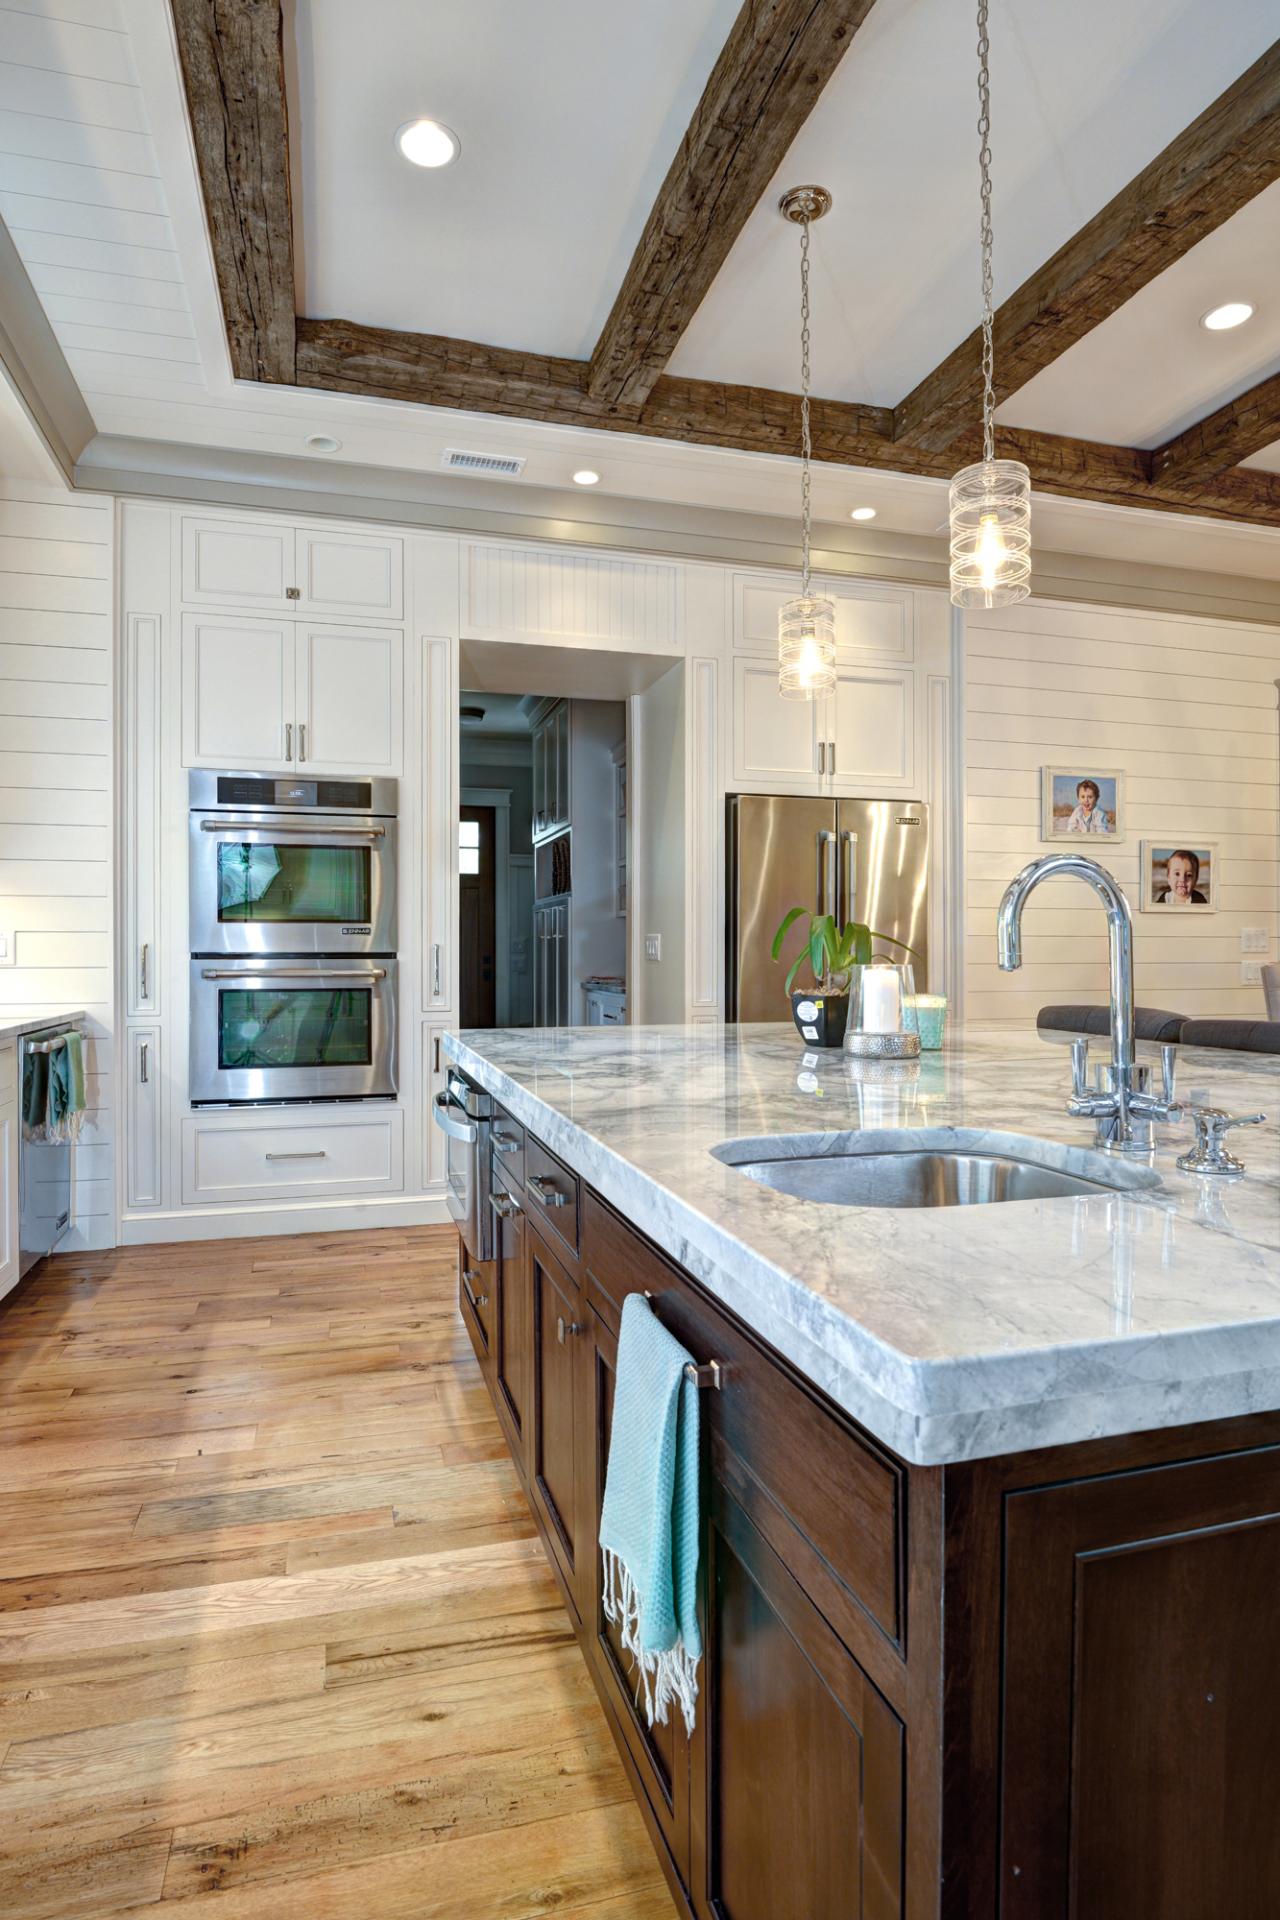 Contemporary Kitchen With Reclaimed Wood Beams And Floors Plus